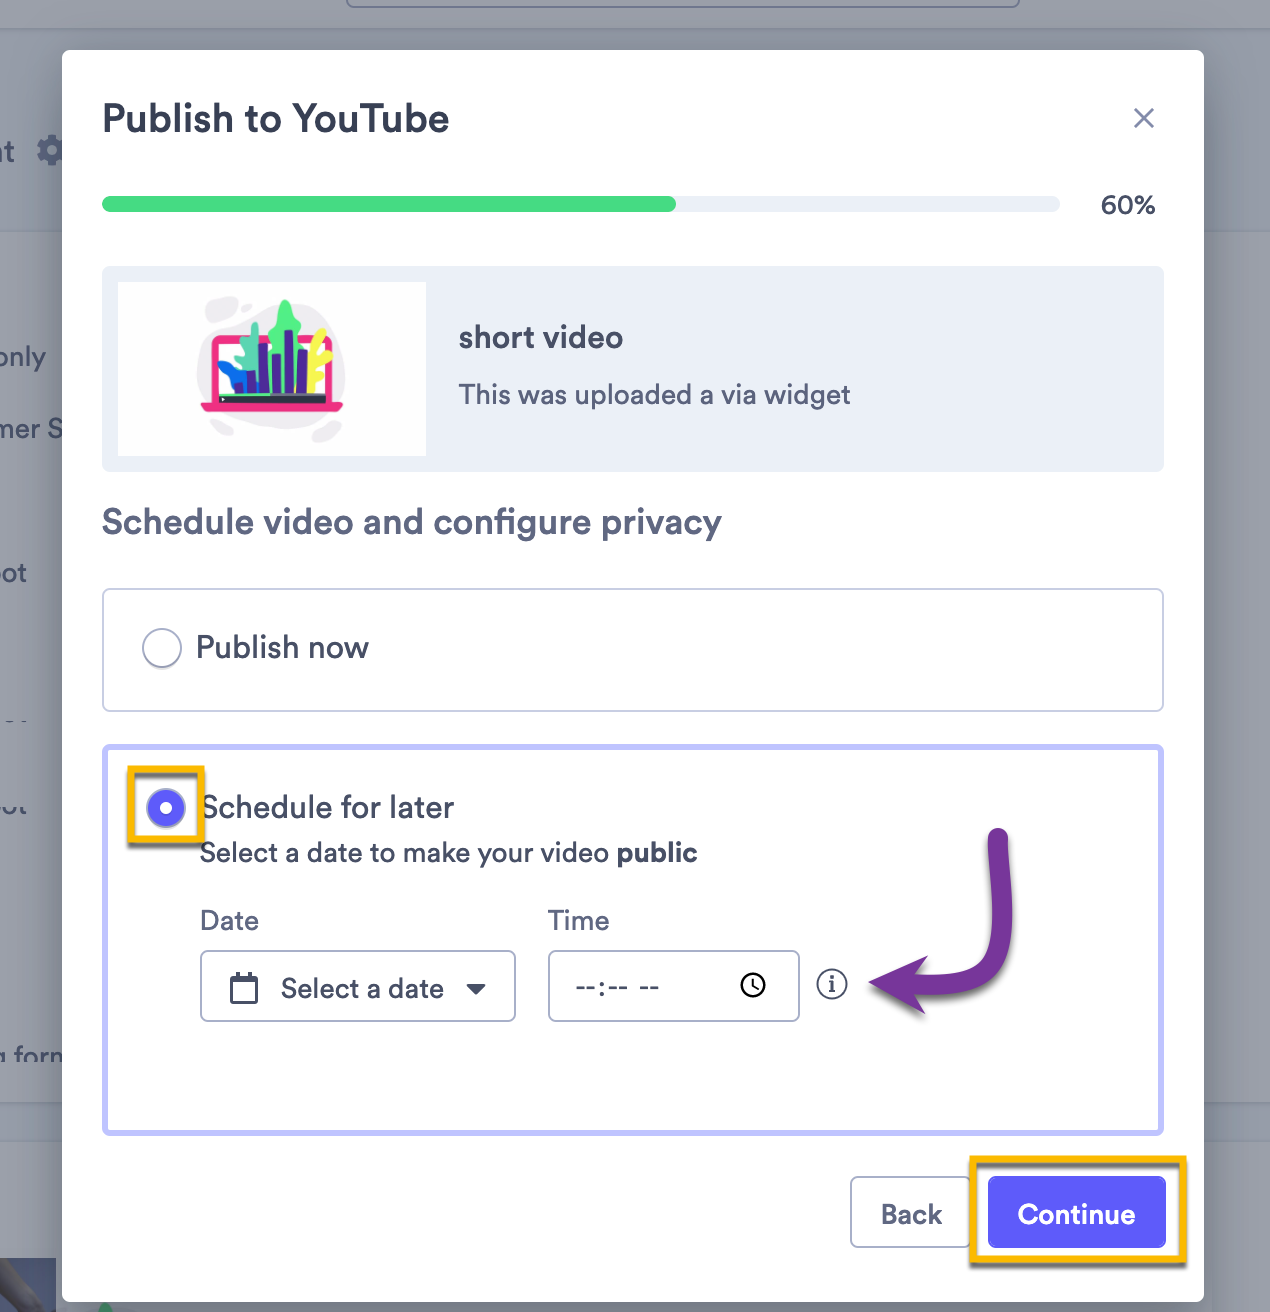 Selecting a date and time to publish your video publicly on YouTube